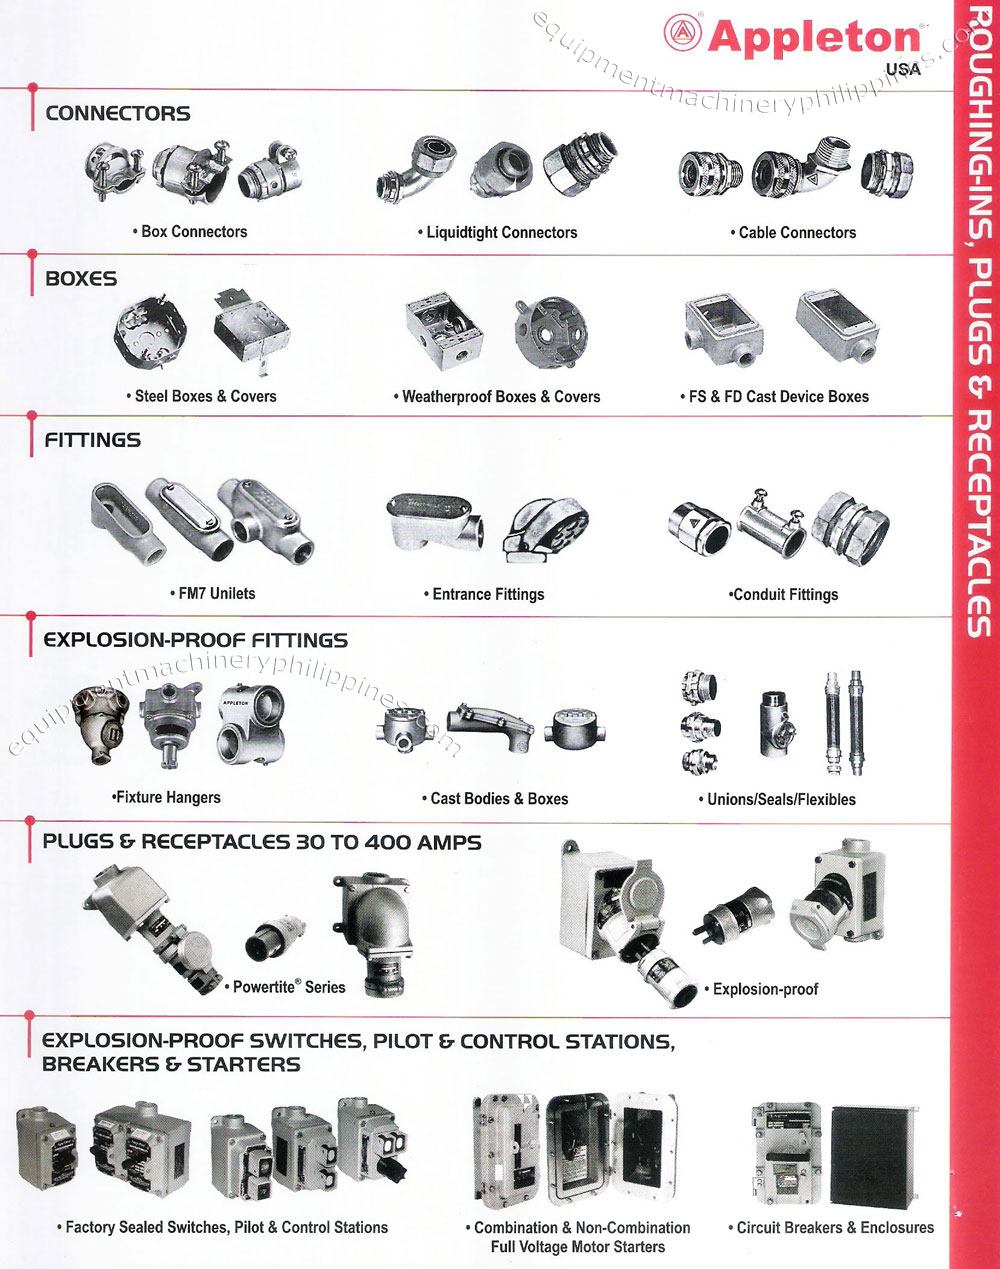 Appleton Connectors, Boxes, Fittings, Explosion Proof Fittings Plugs and Receptacles, Explosion Proof Switches, Pilot and Control Stations, Breakers and Starters